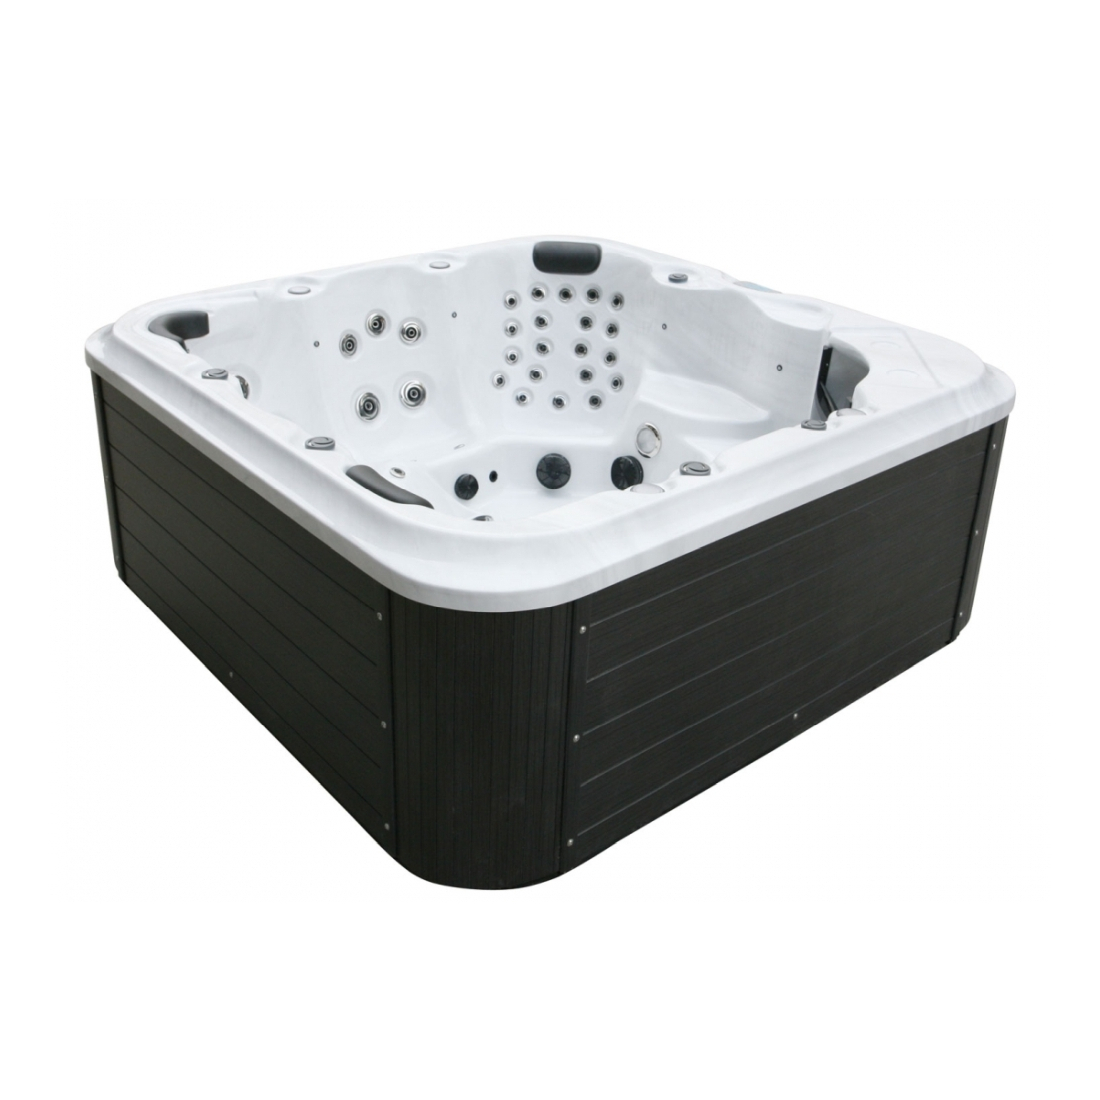 Buying A Second Hand Hot Tub?